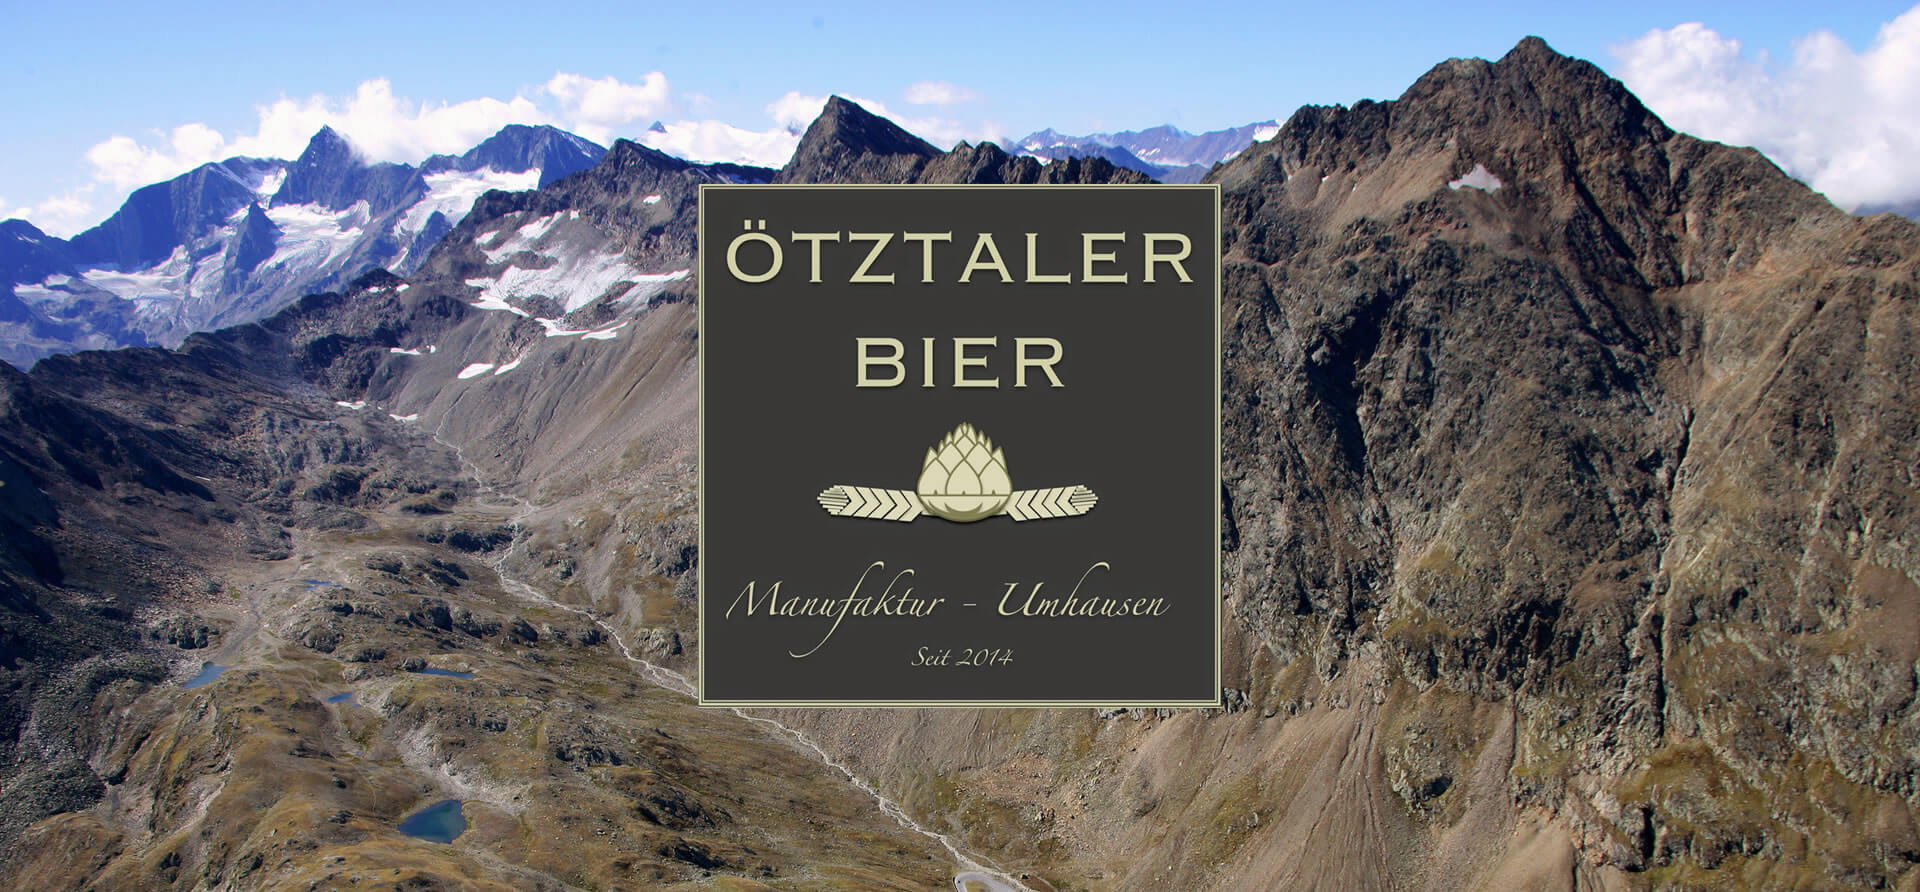 For beer lovers, it is worth booking a tour of the Ötztaler Beer Brewery by personal appointment, where you can also sample the beer.